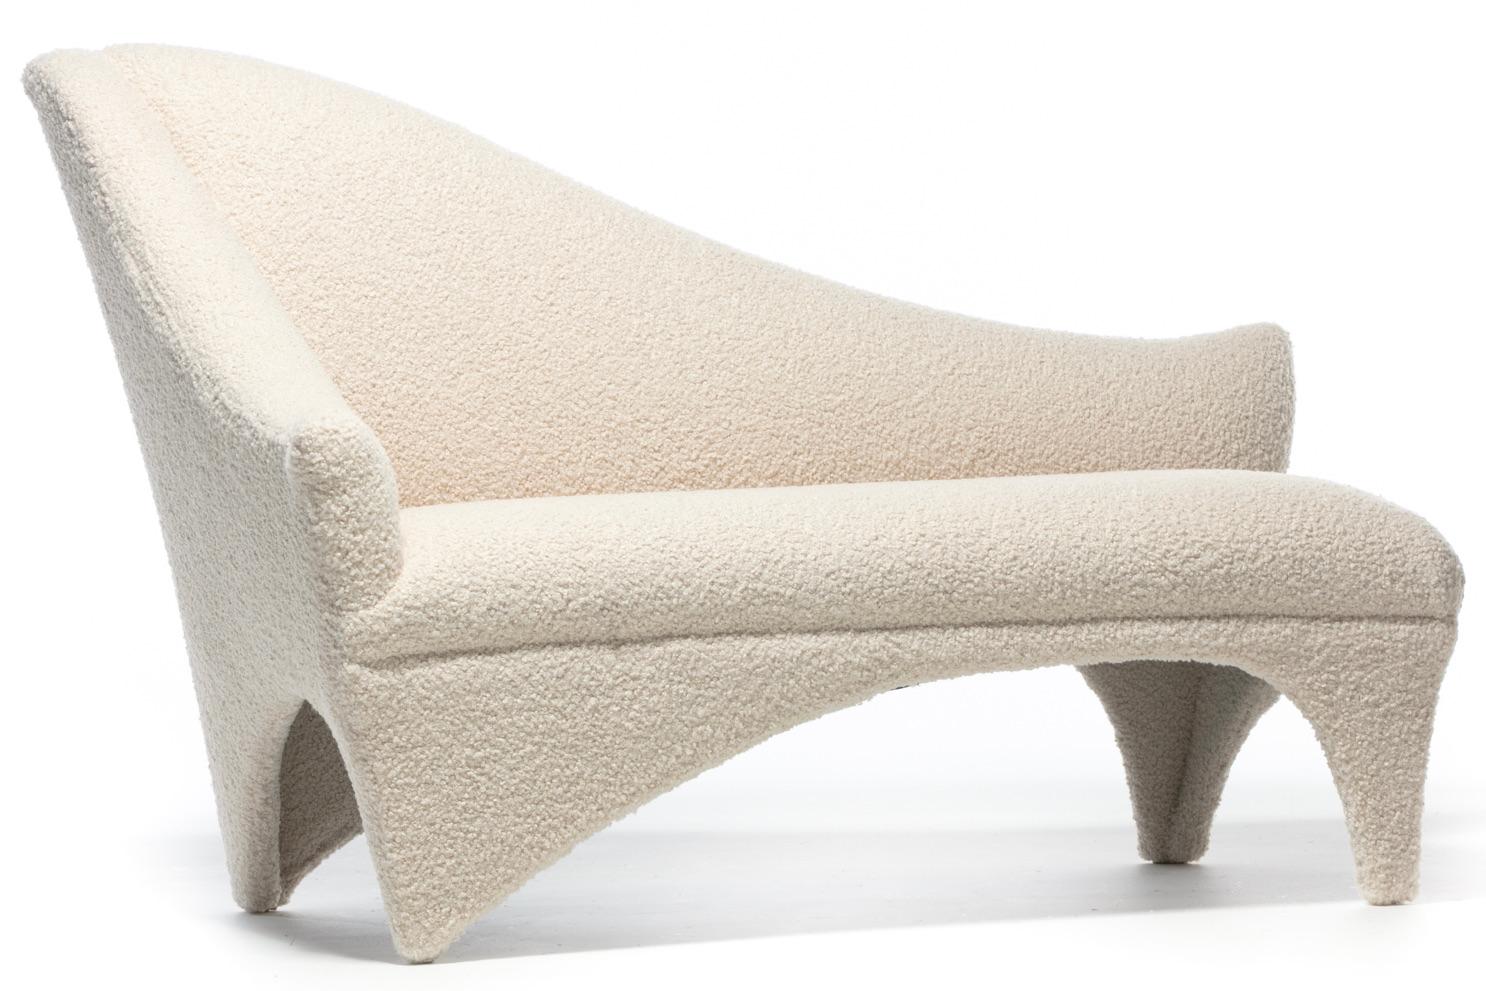 Vladimir Kagan A-Symmetric Settee in Ivory Bouclé by Directional, c. 1991 For Sale 8